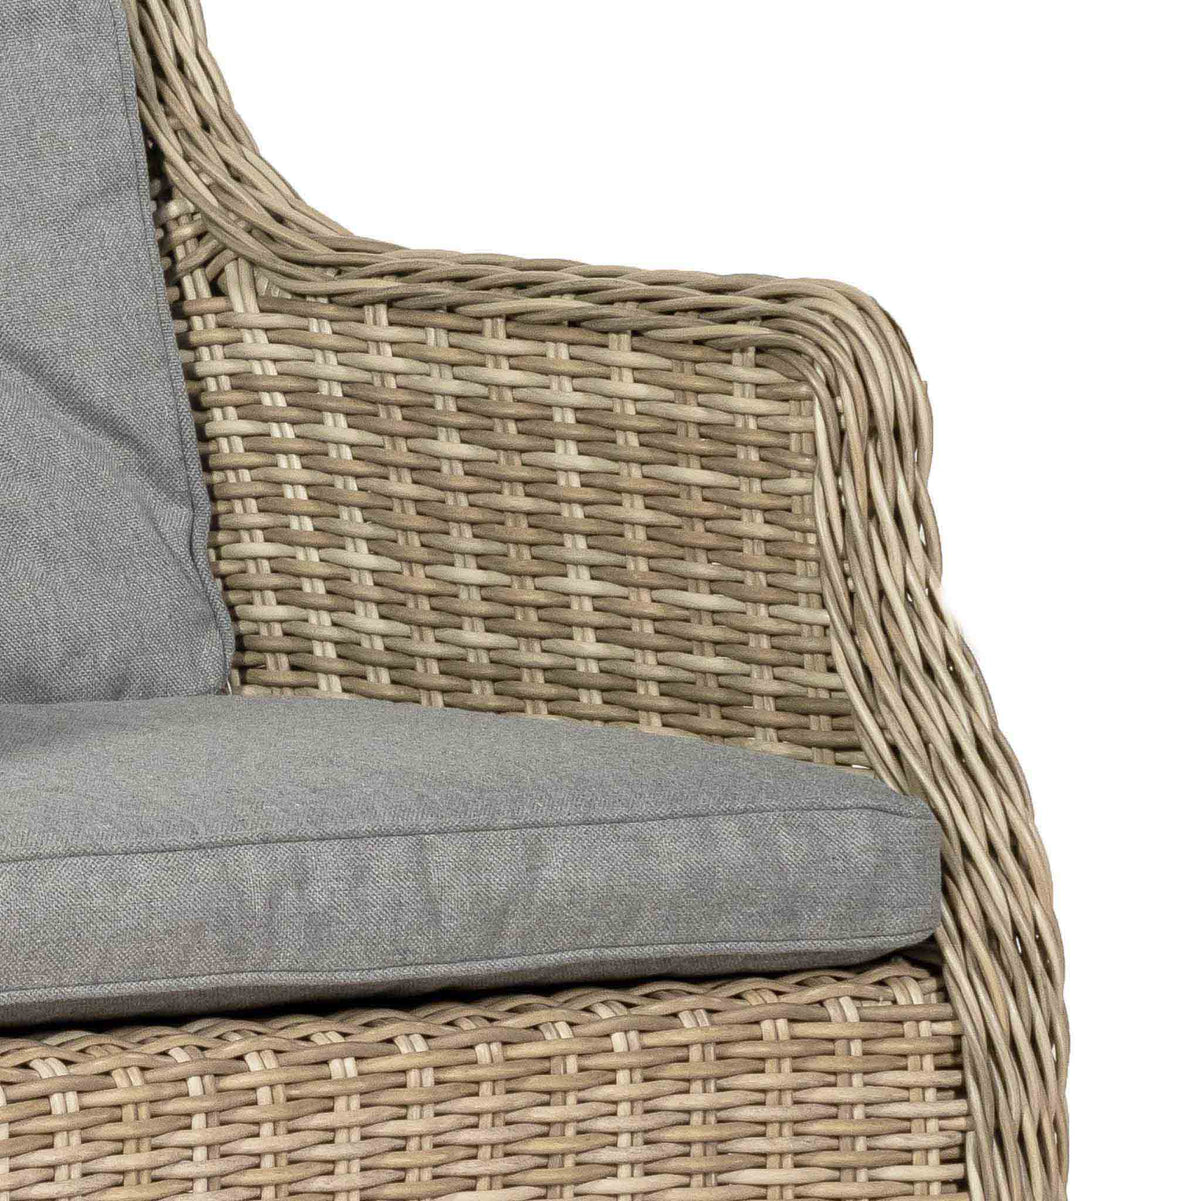 Wentworth High-back Rattan Companion Set - Close up of arm of chair